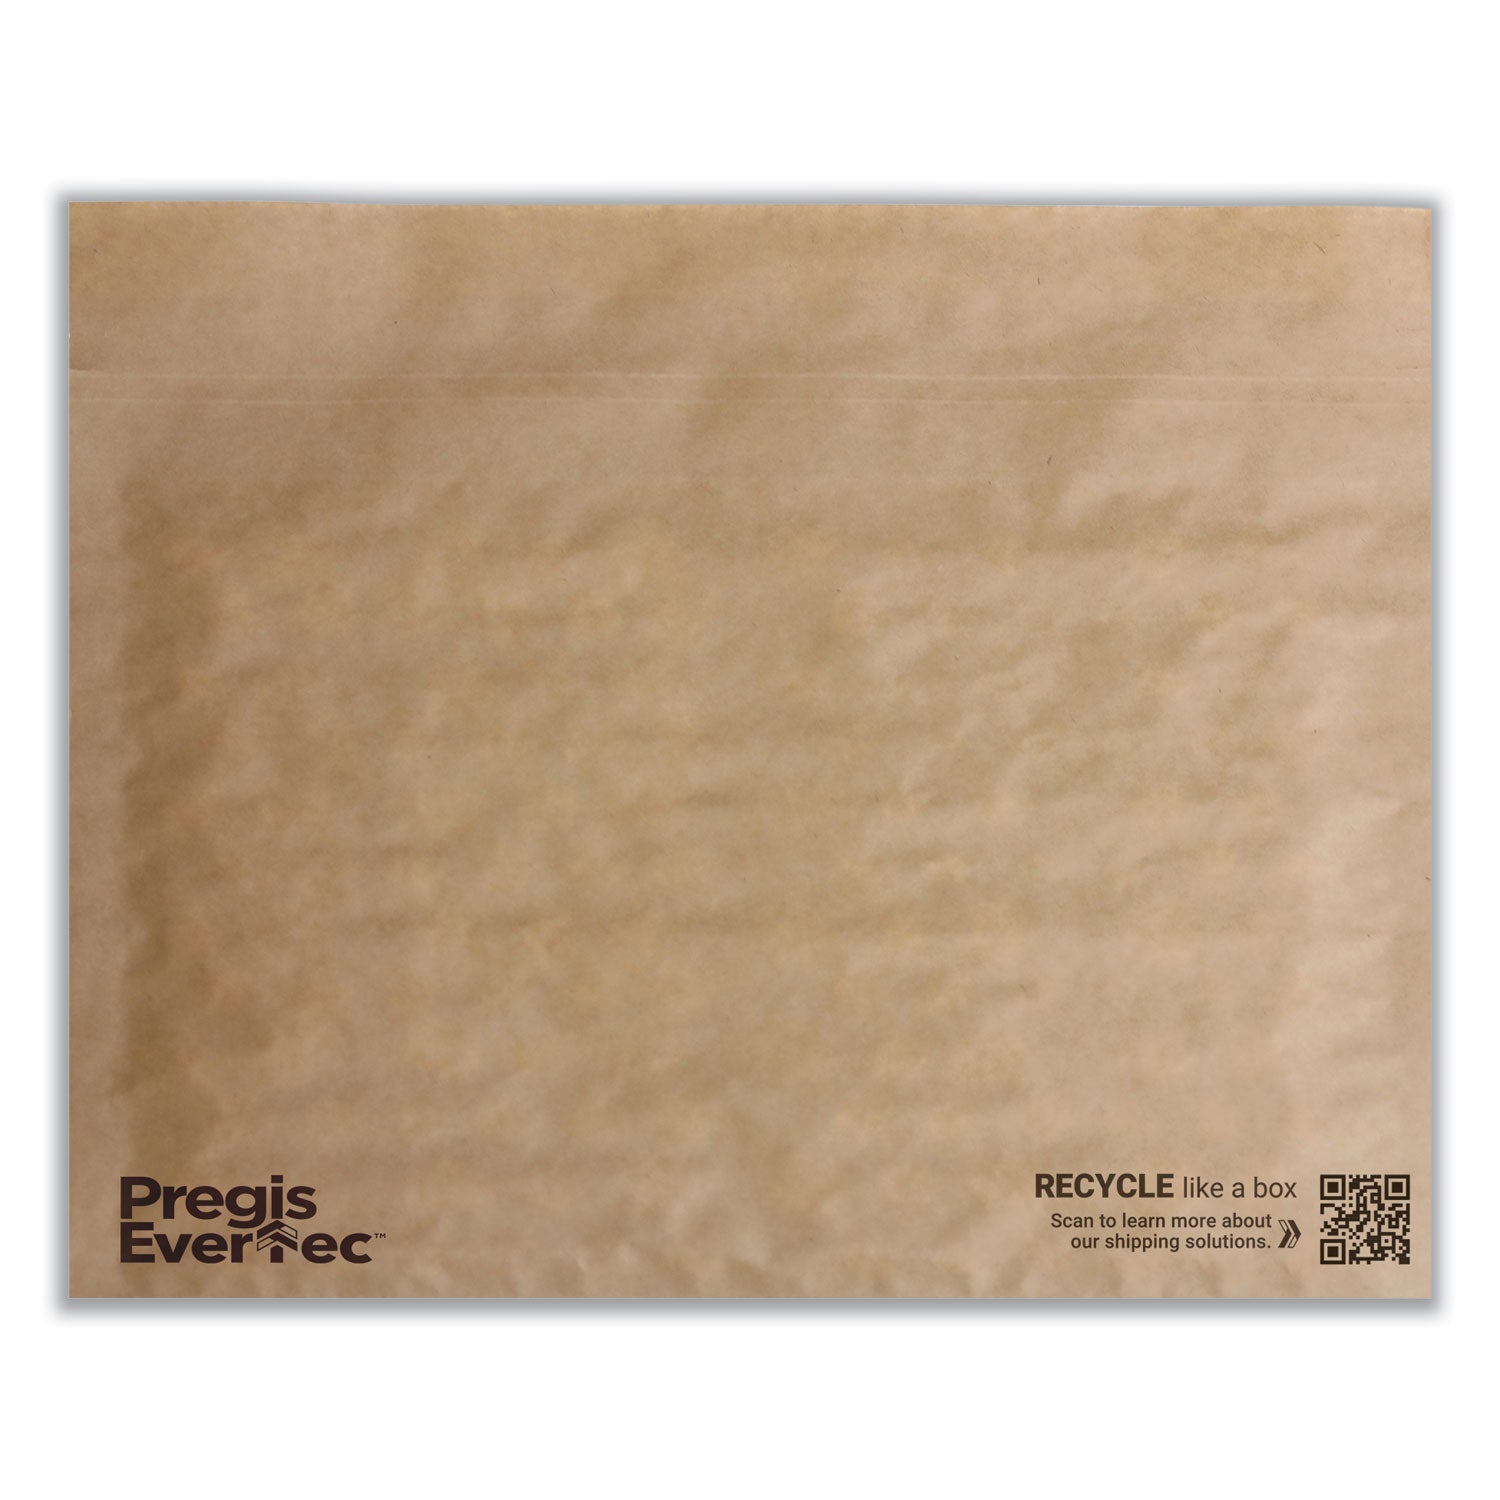 evertec-curbside-recyclable-padded-mailer-#4-kraft-paper-self-adhesive-closure-14-x-9-brown-150-carton_pgs4083815 - 2